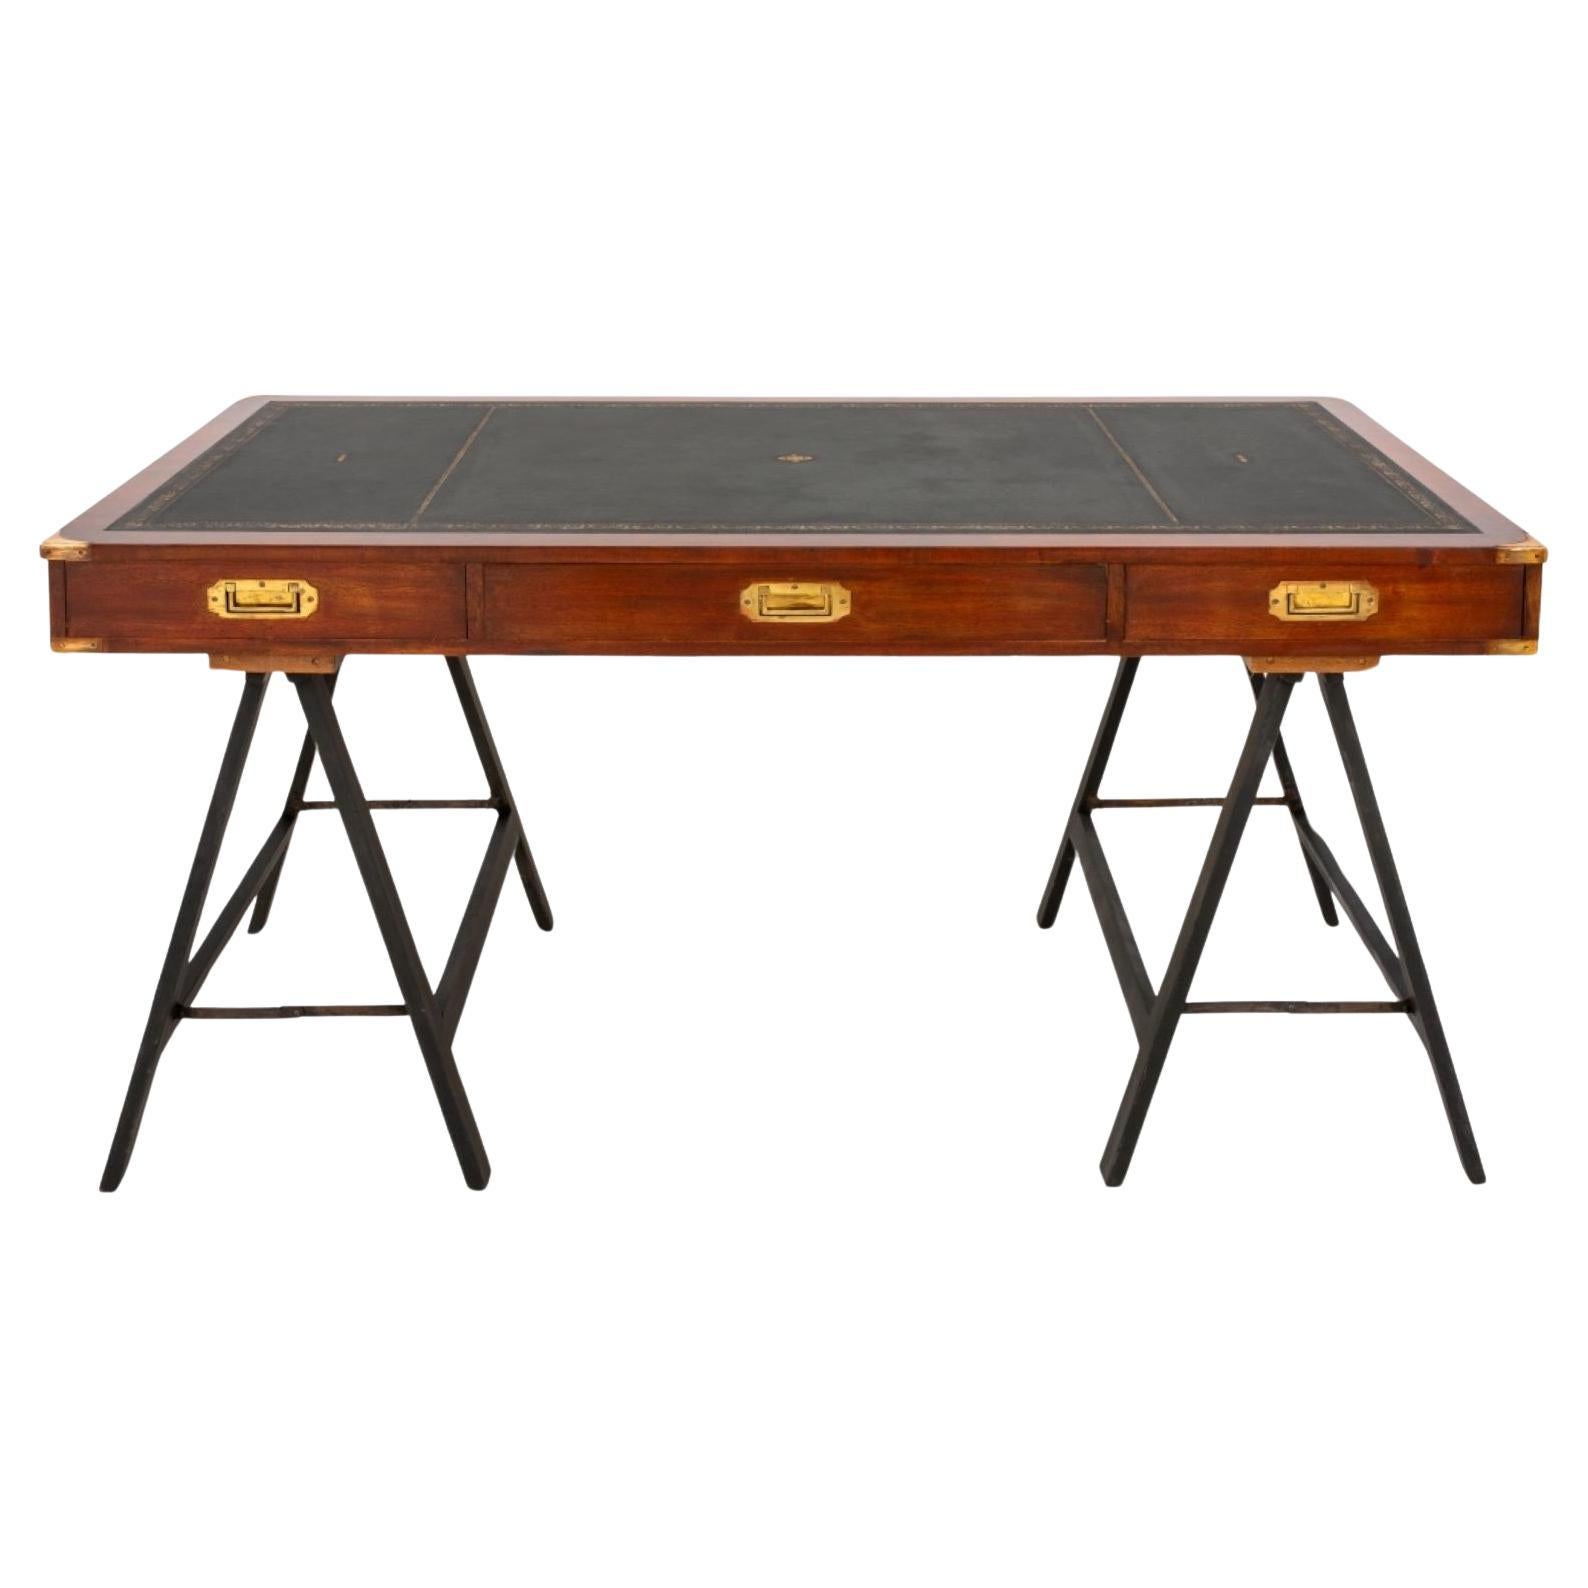 Bevan Funnell English Reprodux Campaign Desk For Sale